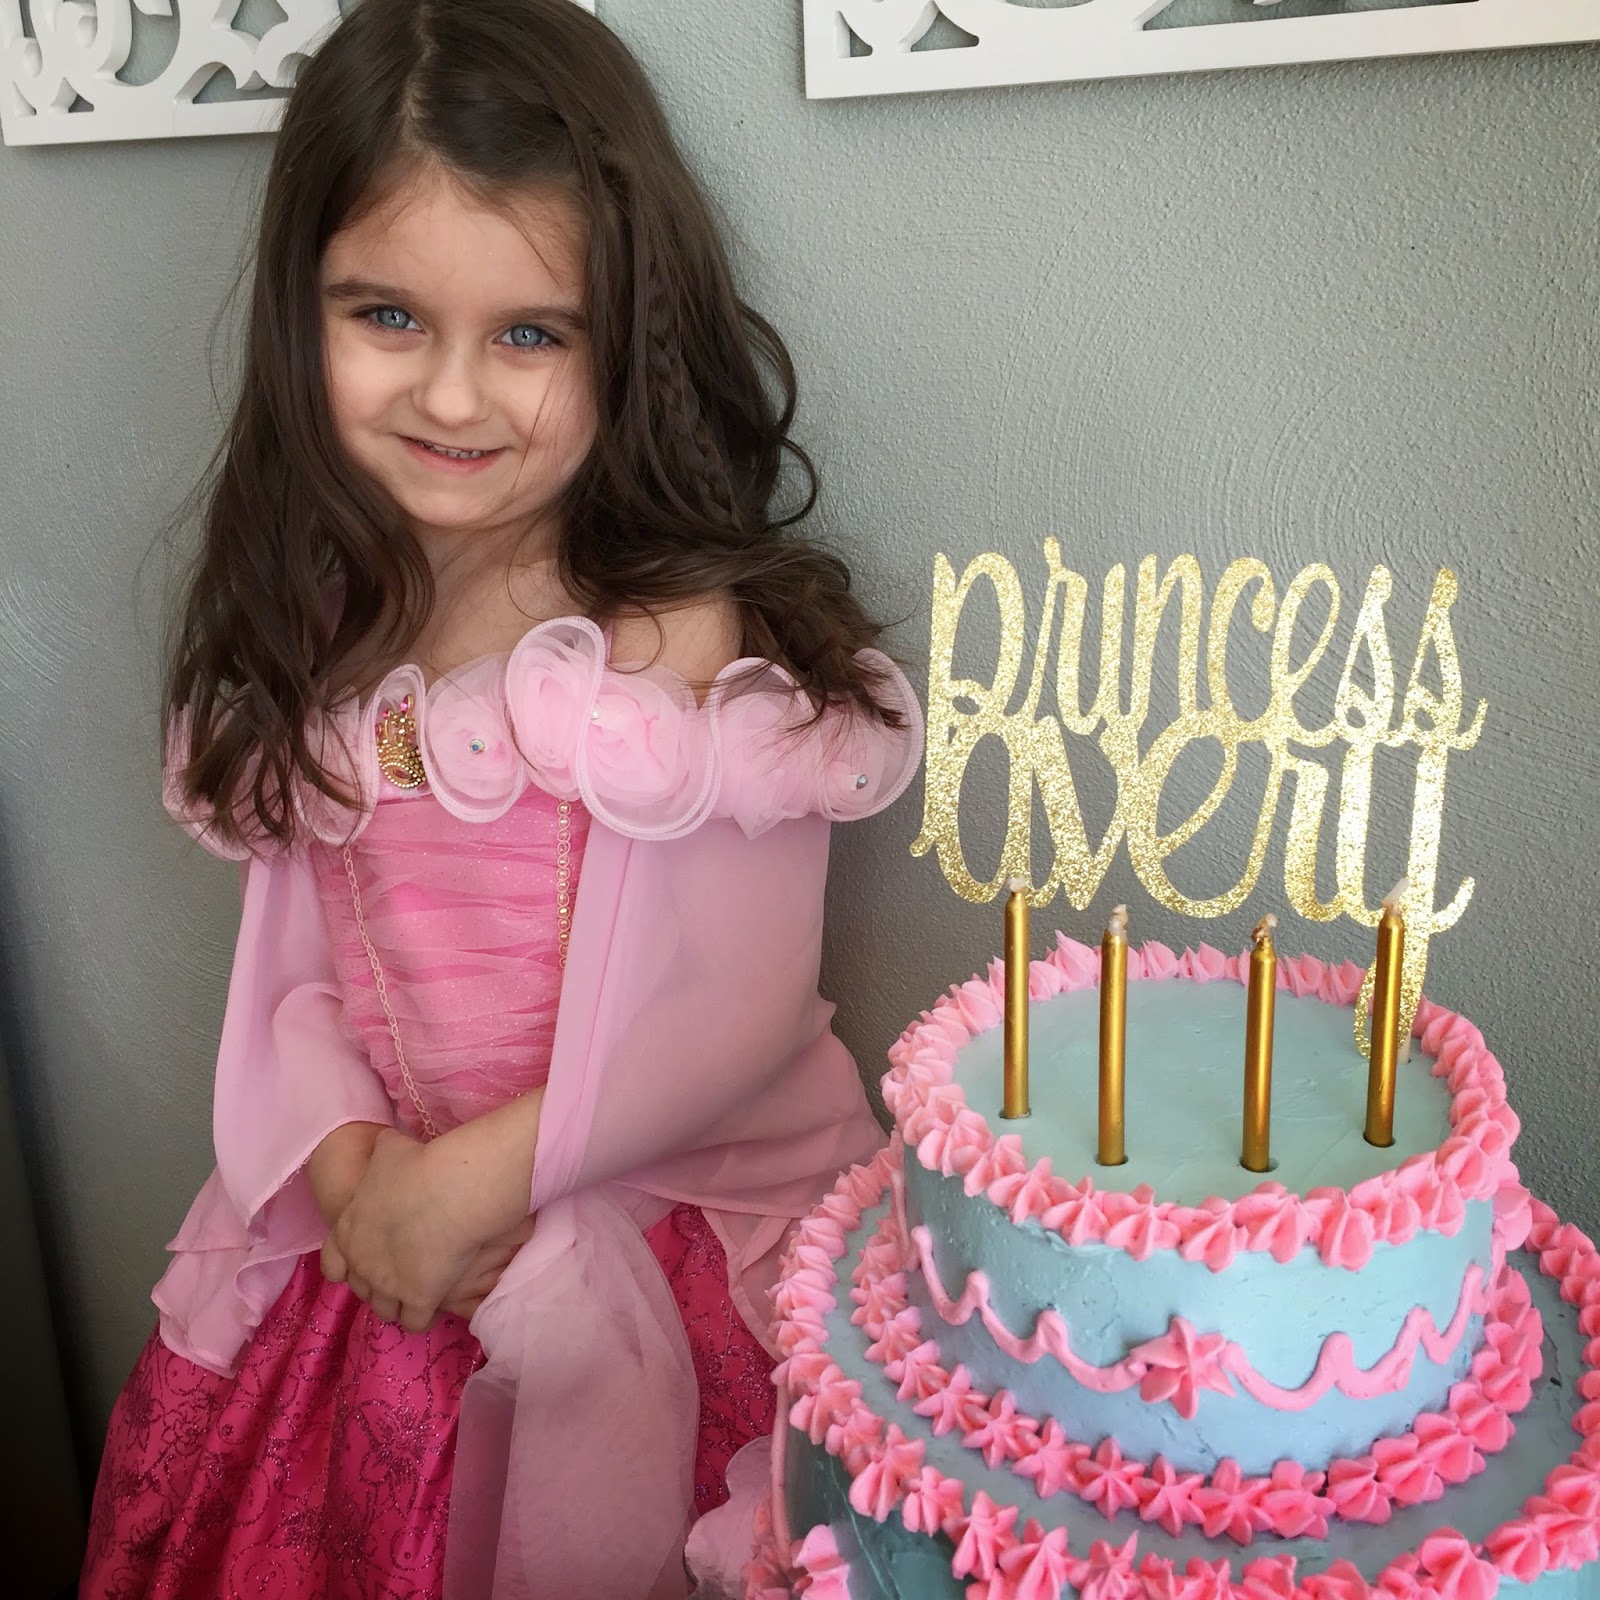 first comes love: Avery's 4th Birthday!